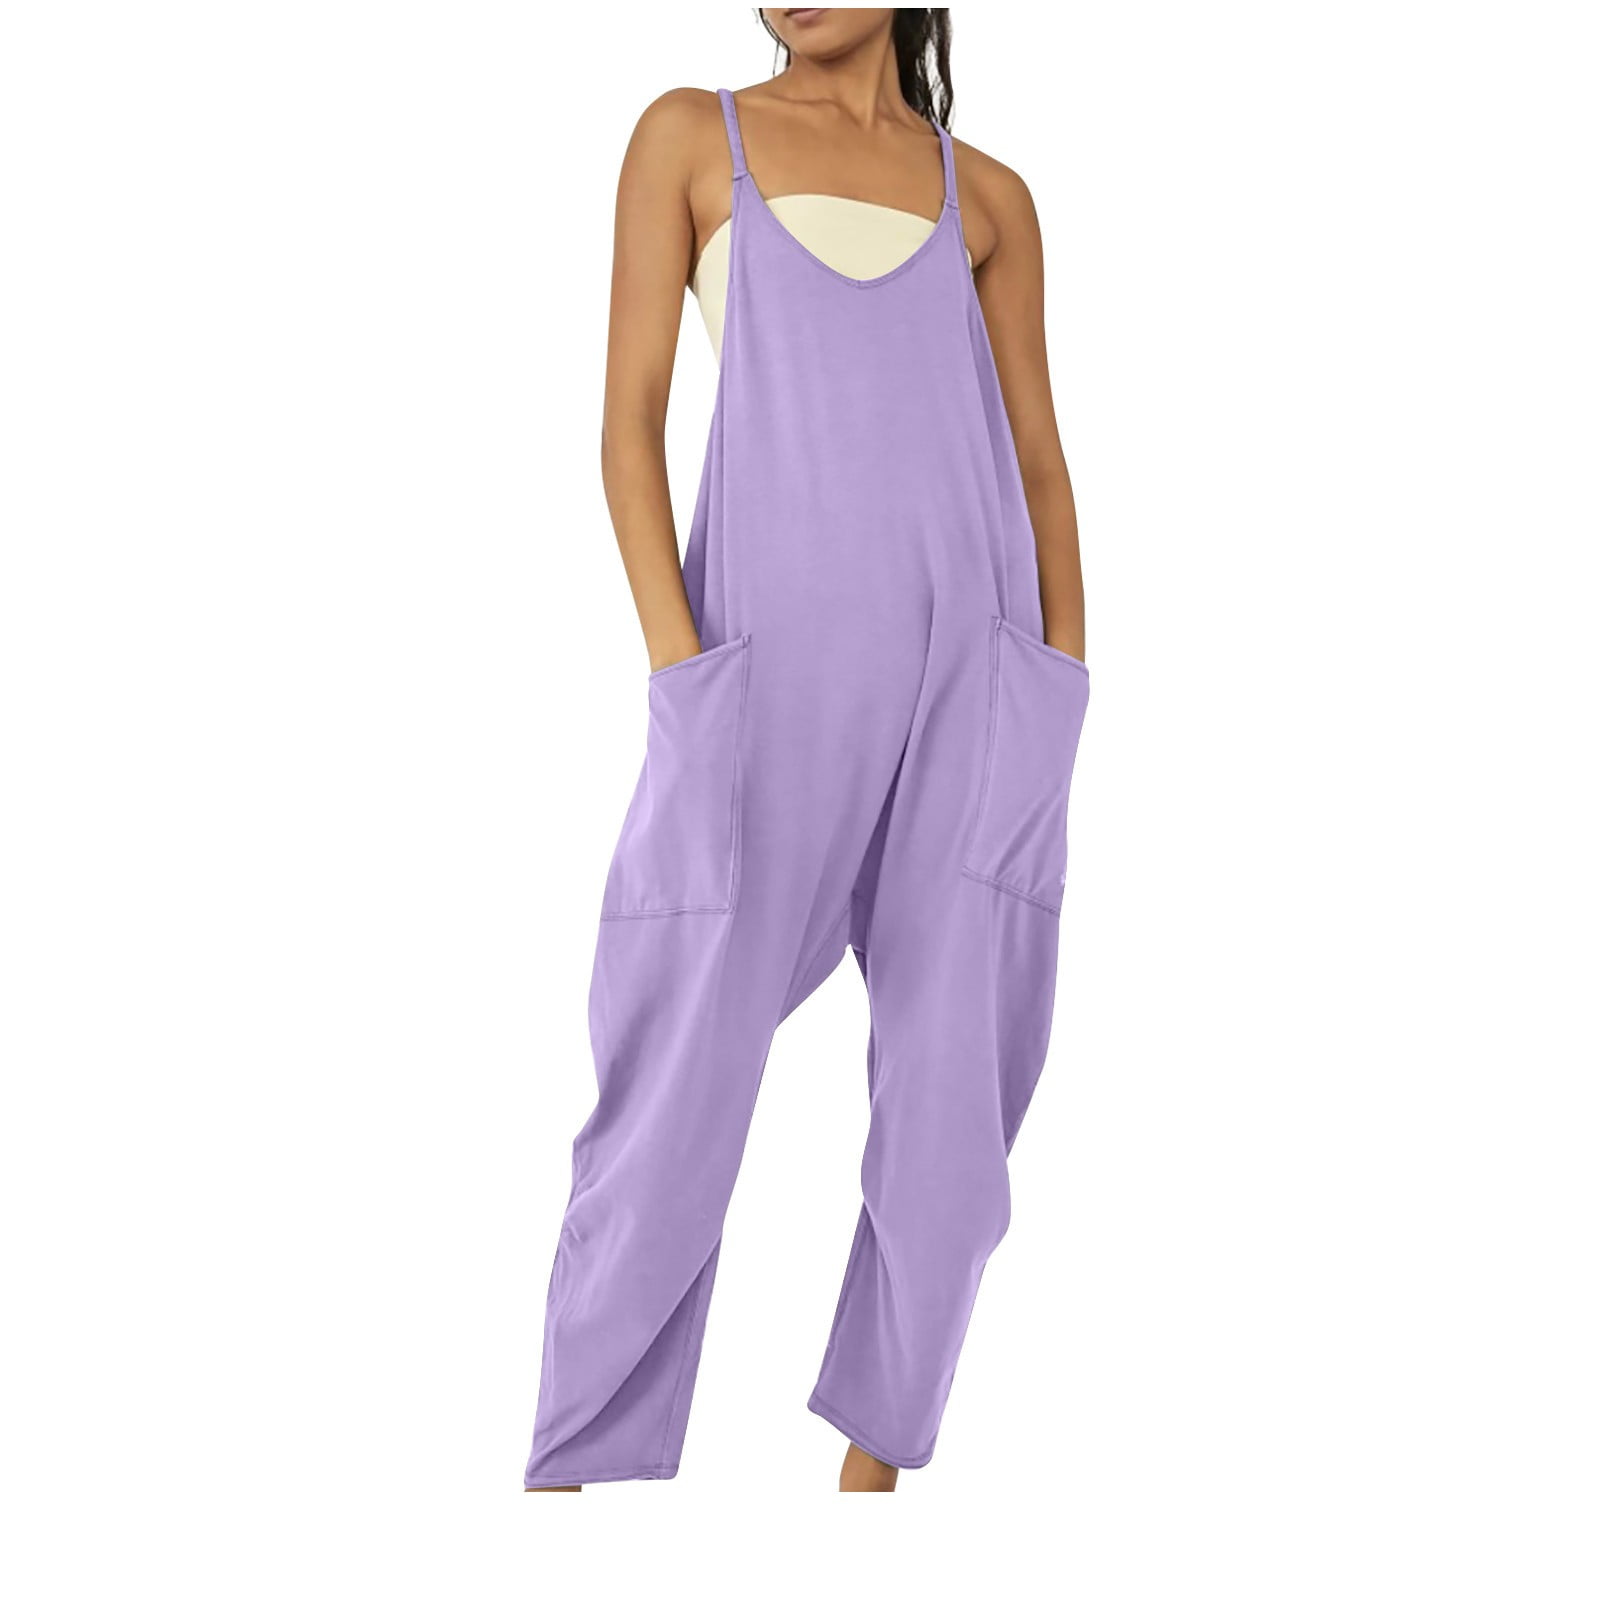 Yck-SAiWed Prime Same Day Items Womens Fashion Overalls Baggy Loose Long  Pants Jumpsuit Casual Summer Sleeveless Adjustable Strap Rompers Purple